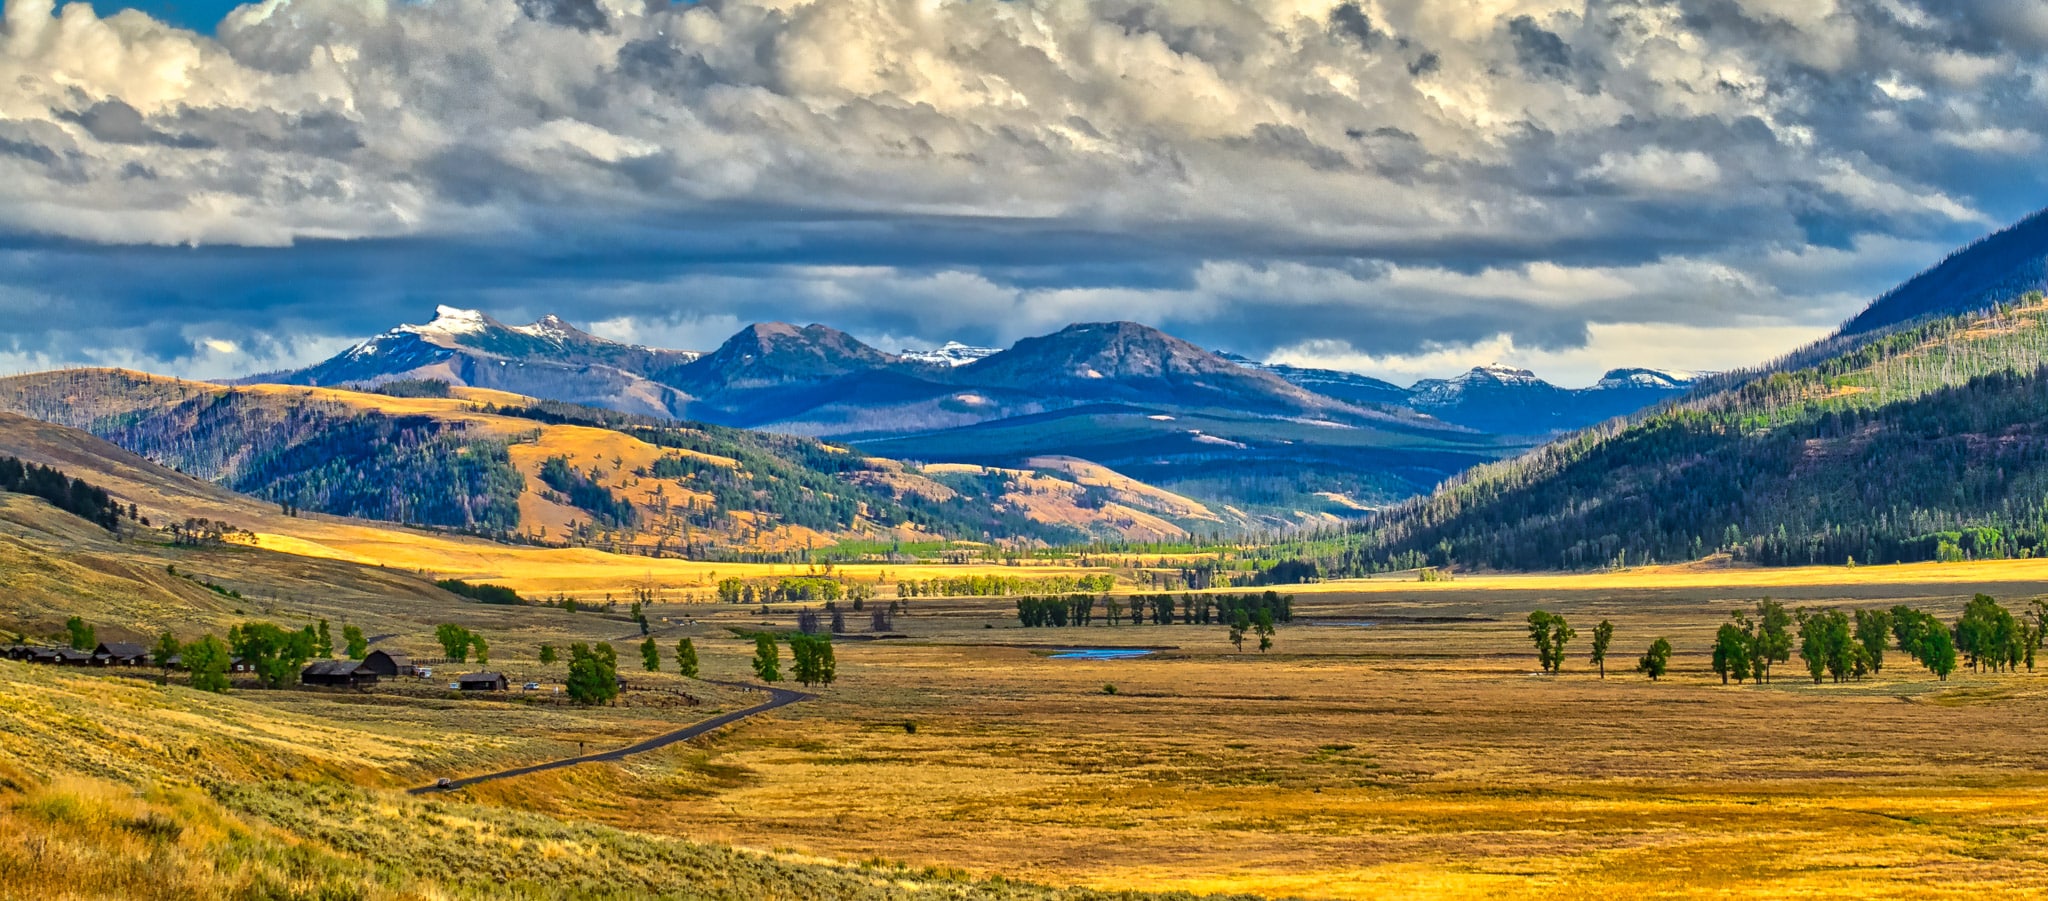 Looking down the Lamar Valley toward the Absaroka mountains. Visible at the lower left is the Yellowstone Associaton Institute facility.